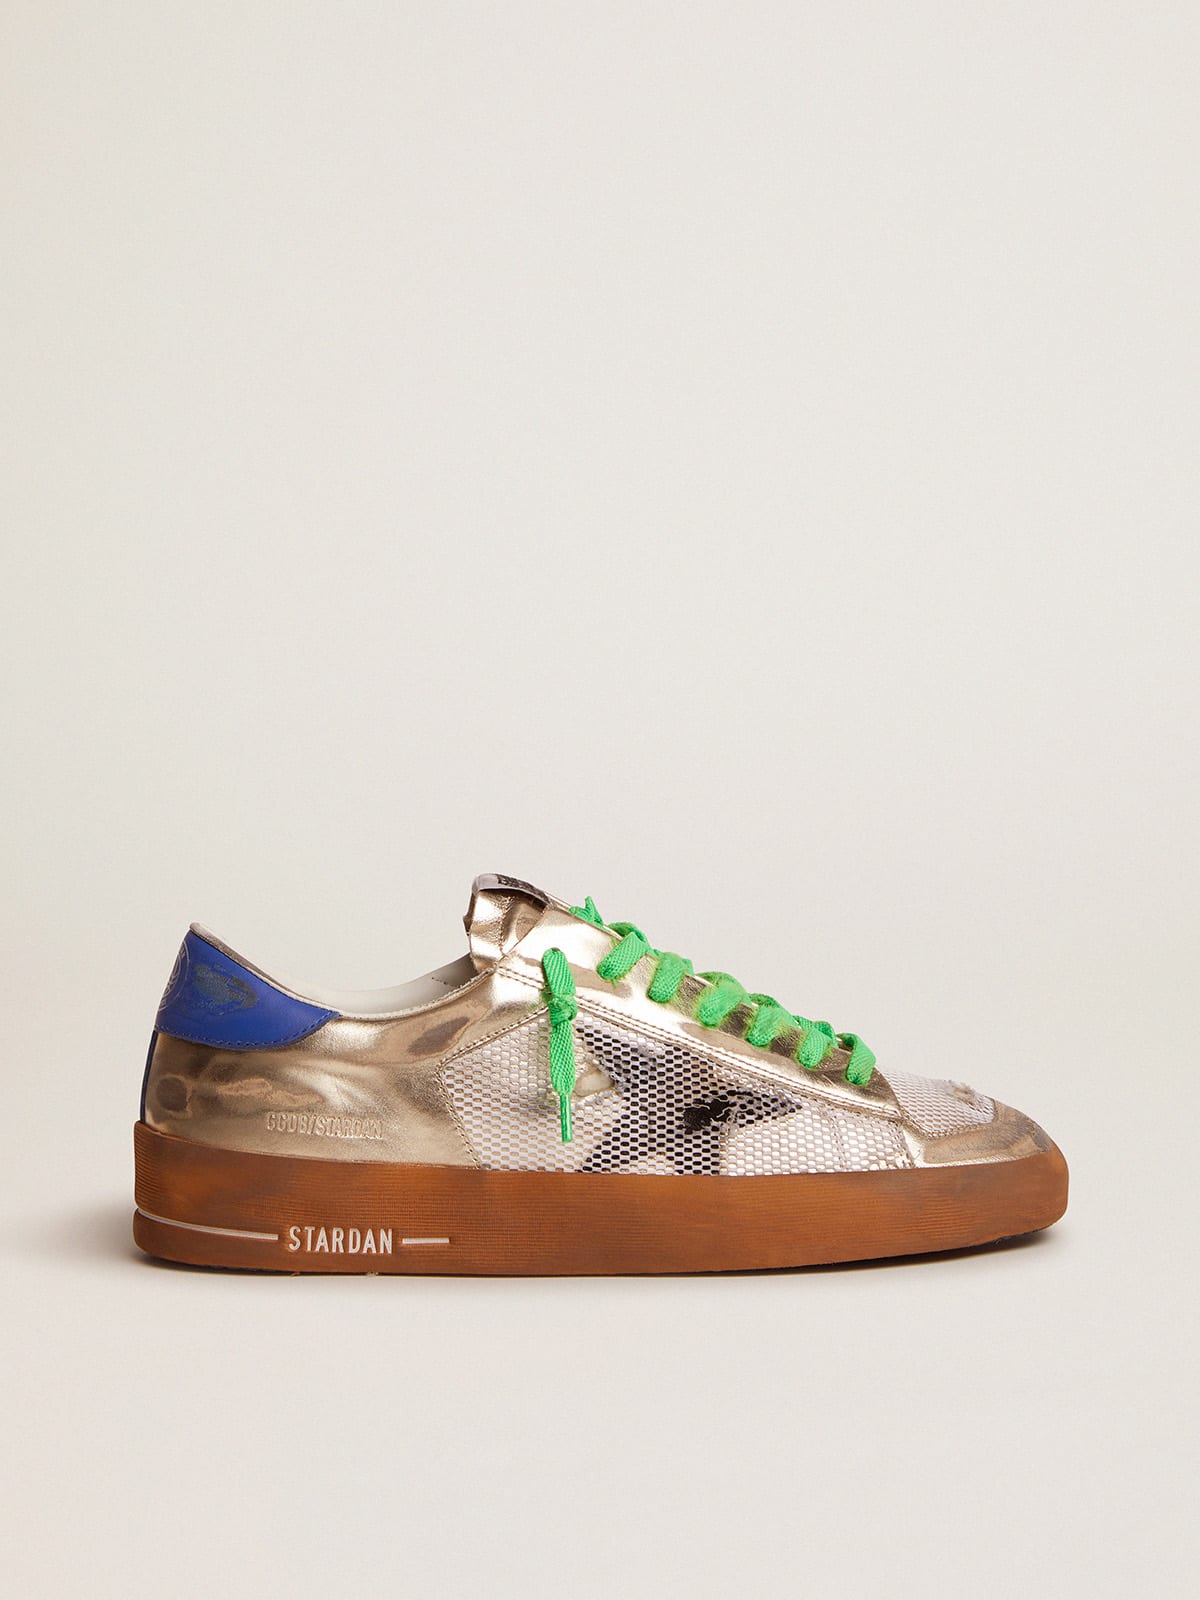 Golden Goose - Women’s Stardan LAB sneakers in laminated leather and mesh with a blue heel tab in 